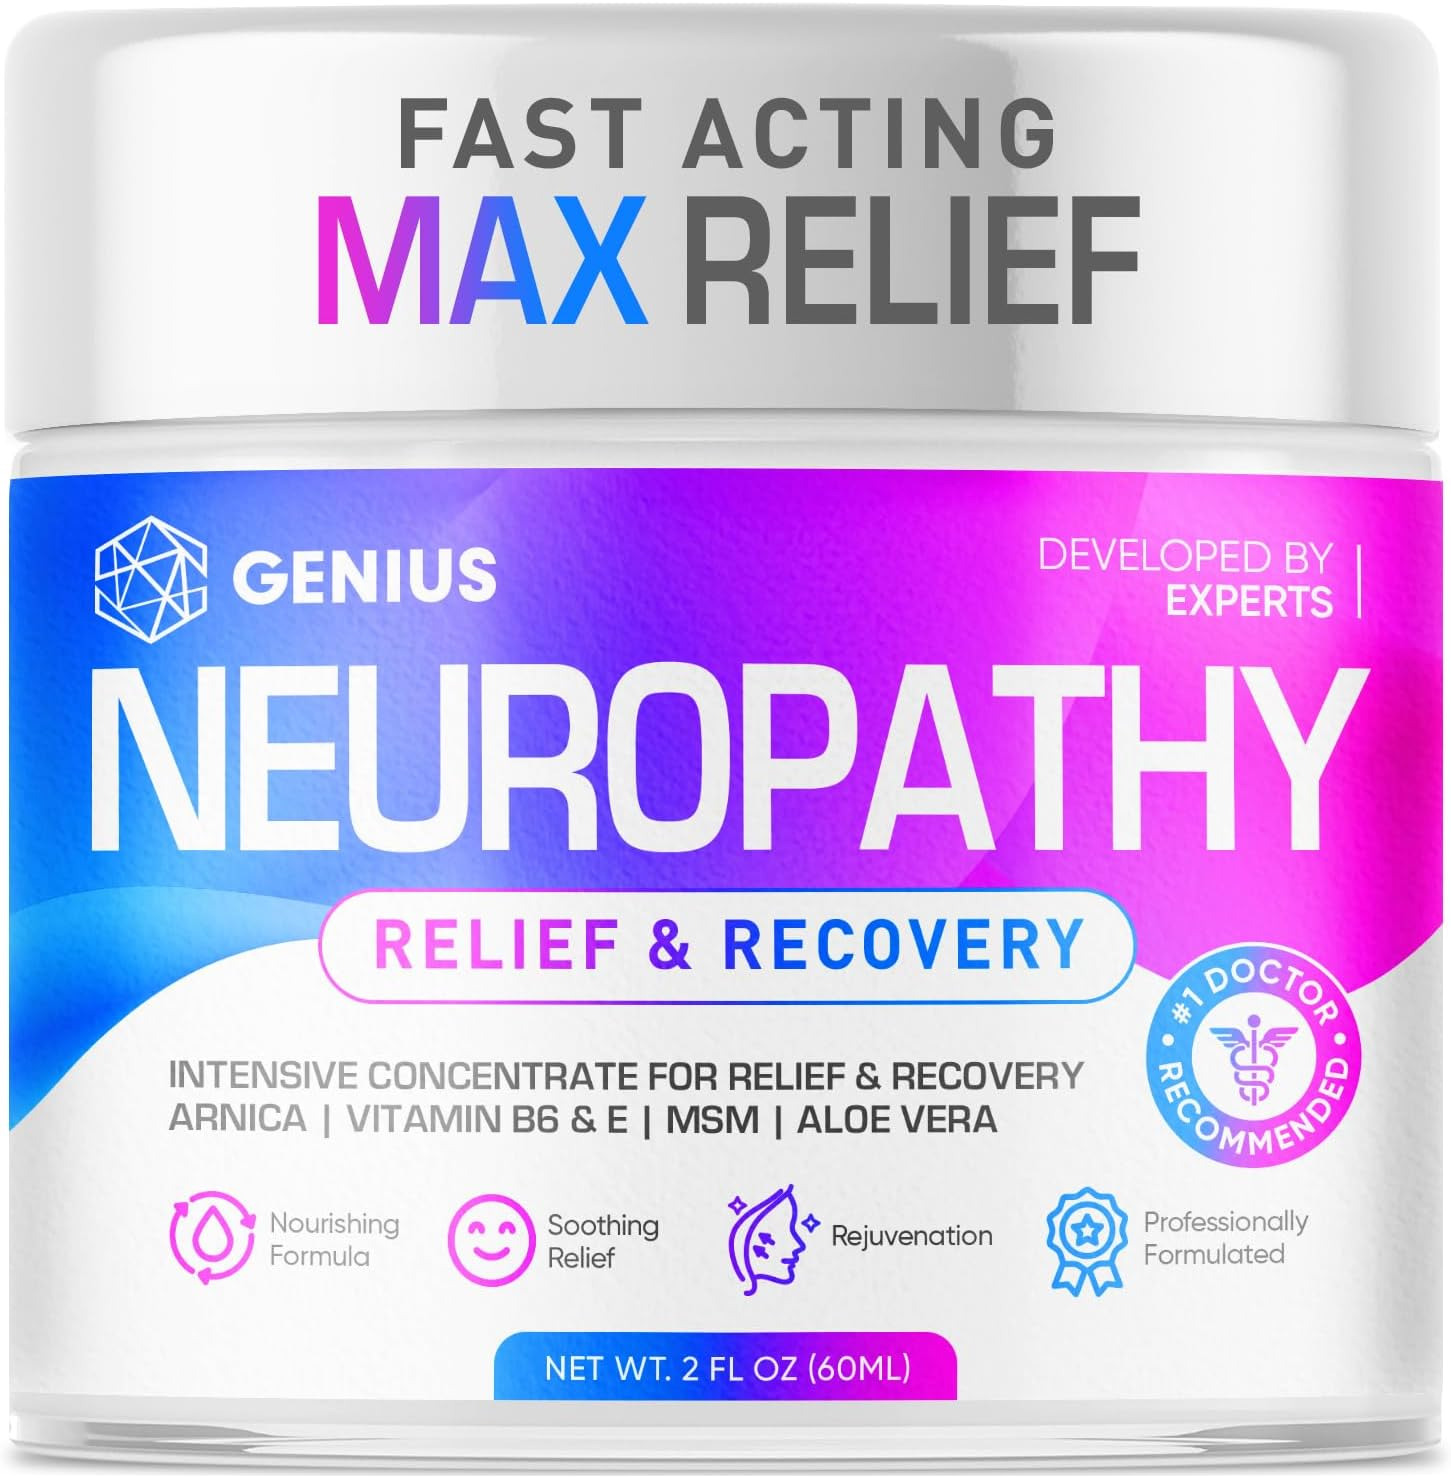  Neuropathy Nerve Relief Cream with Arnica and Vitamin B6 - Maximum Strength for